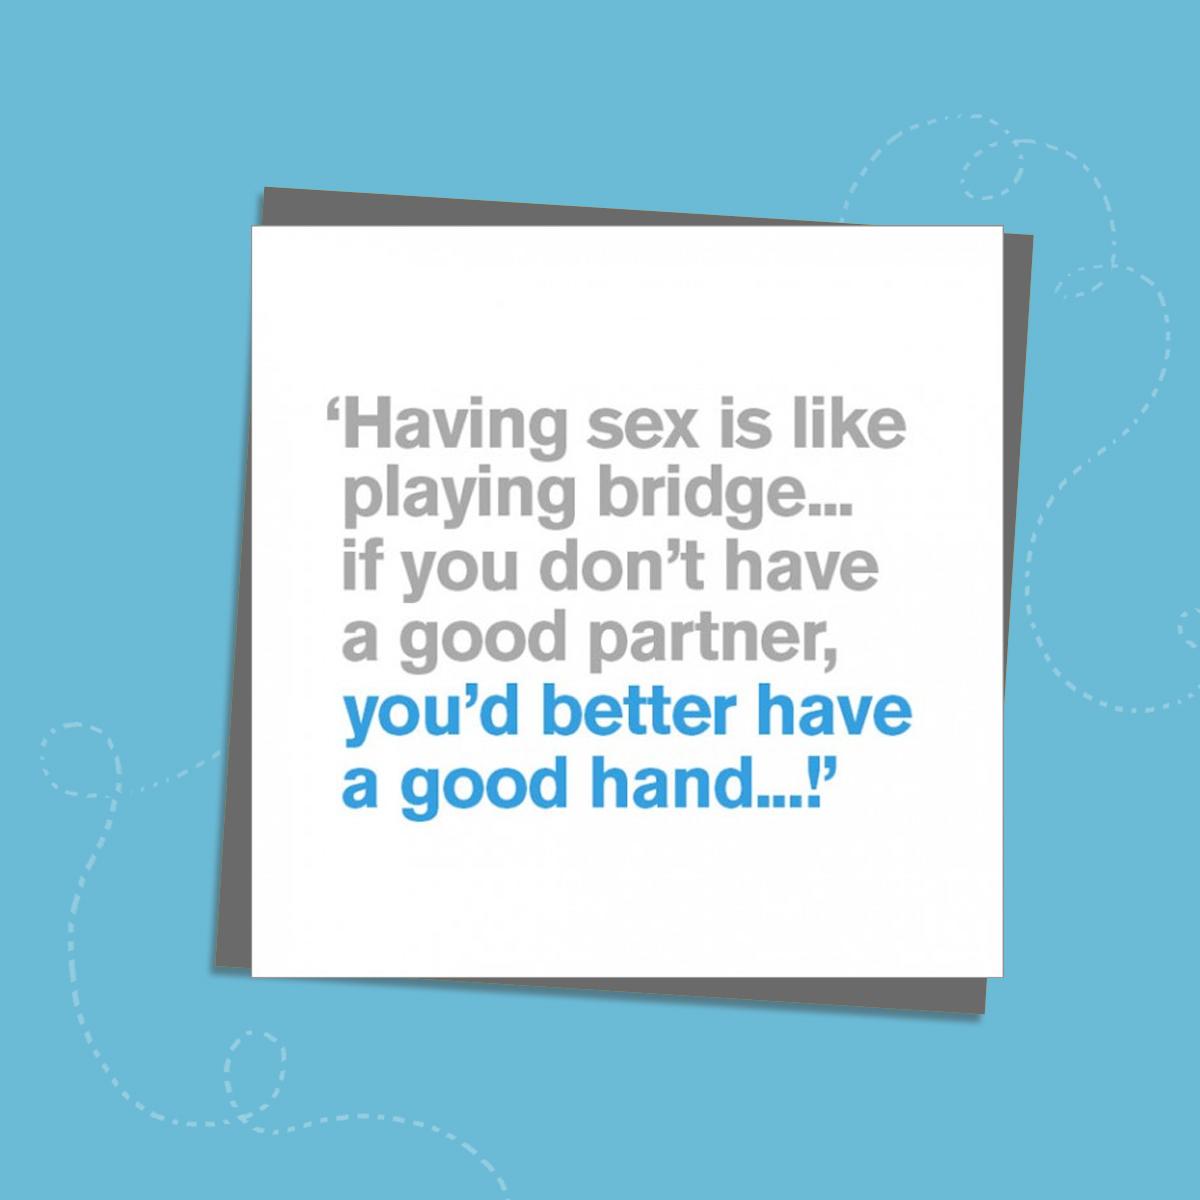 To The Point Humorous Card With Grey And Blue Text To Front Only. Text Reads: ' Having sex is like playing bridge...if you don't have a partner, you'd better have a good hand...!' Blank Inside For Own Message. Complete With Grey Envelope